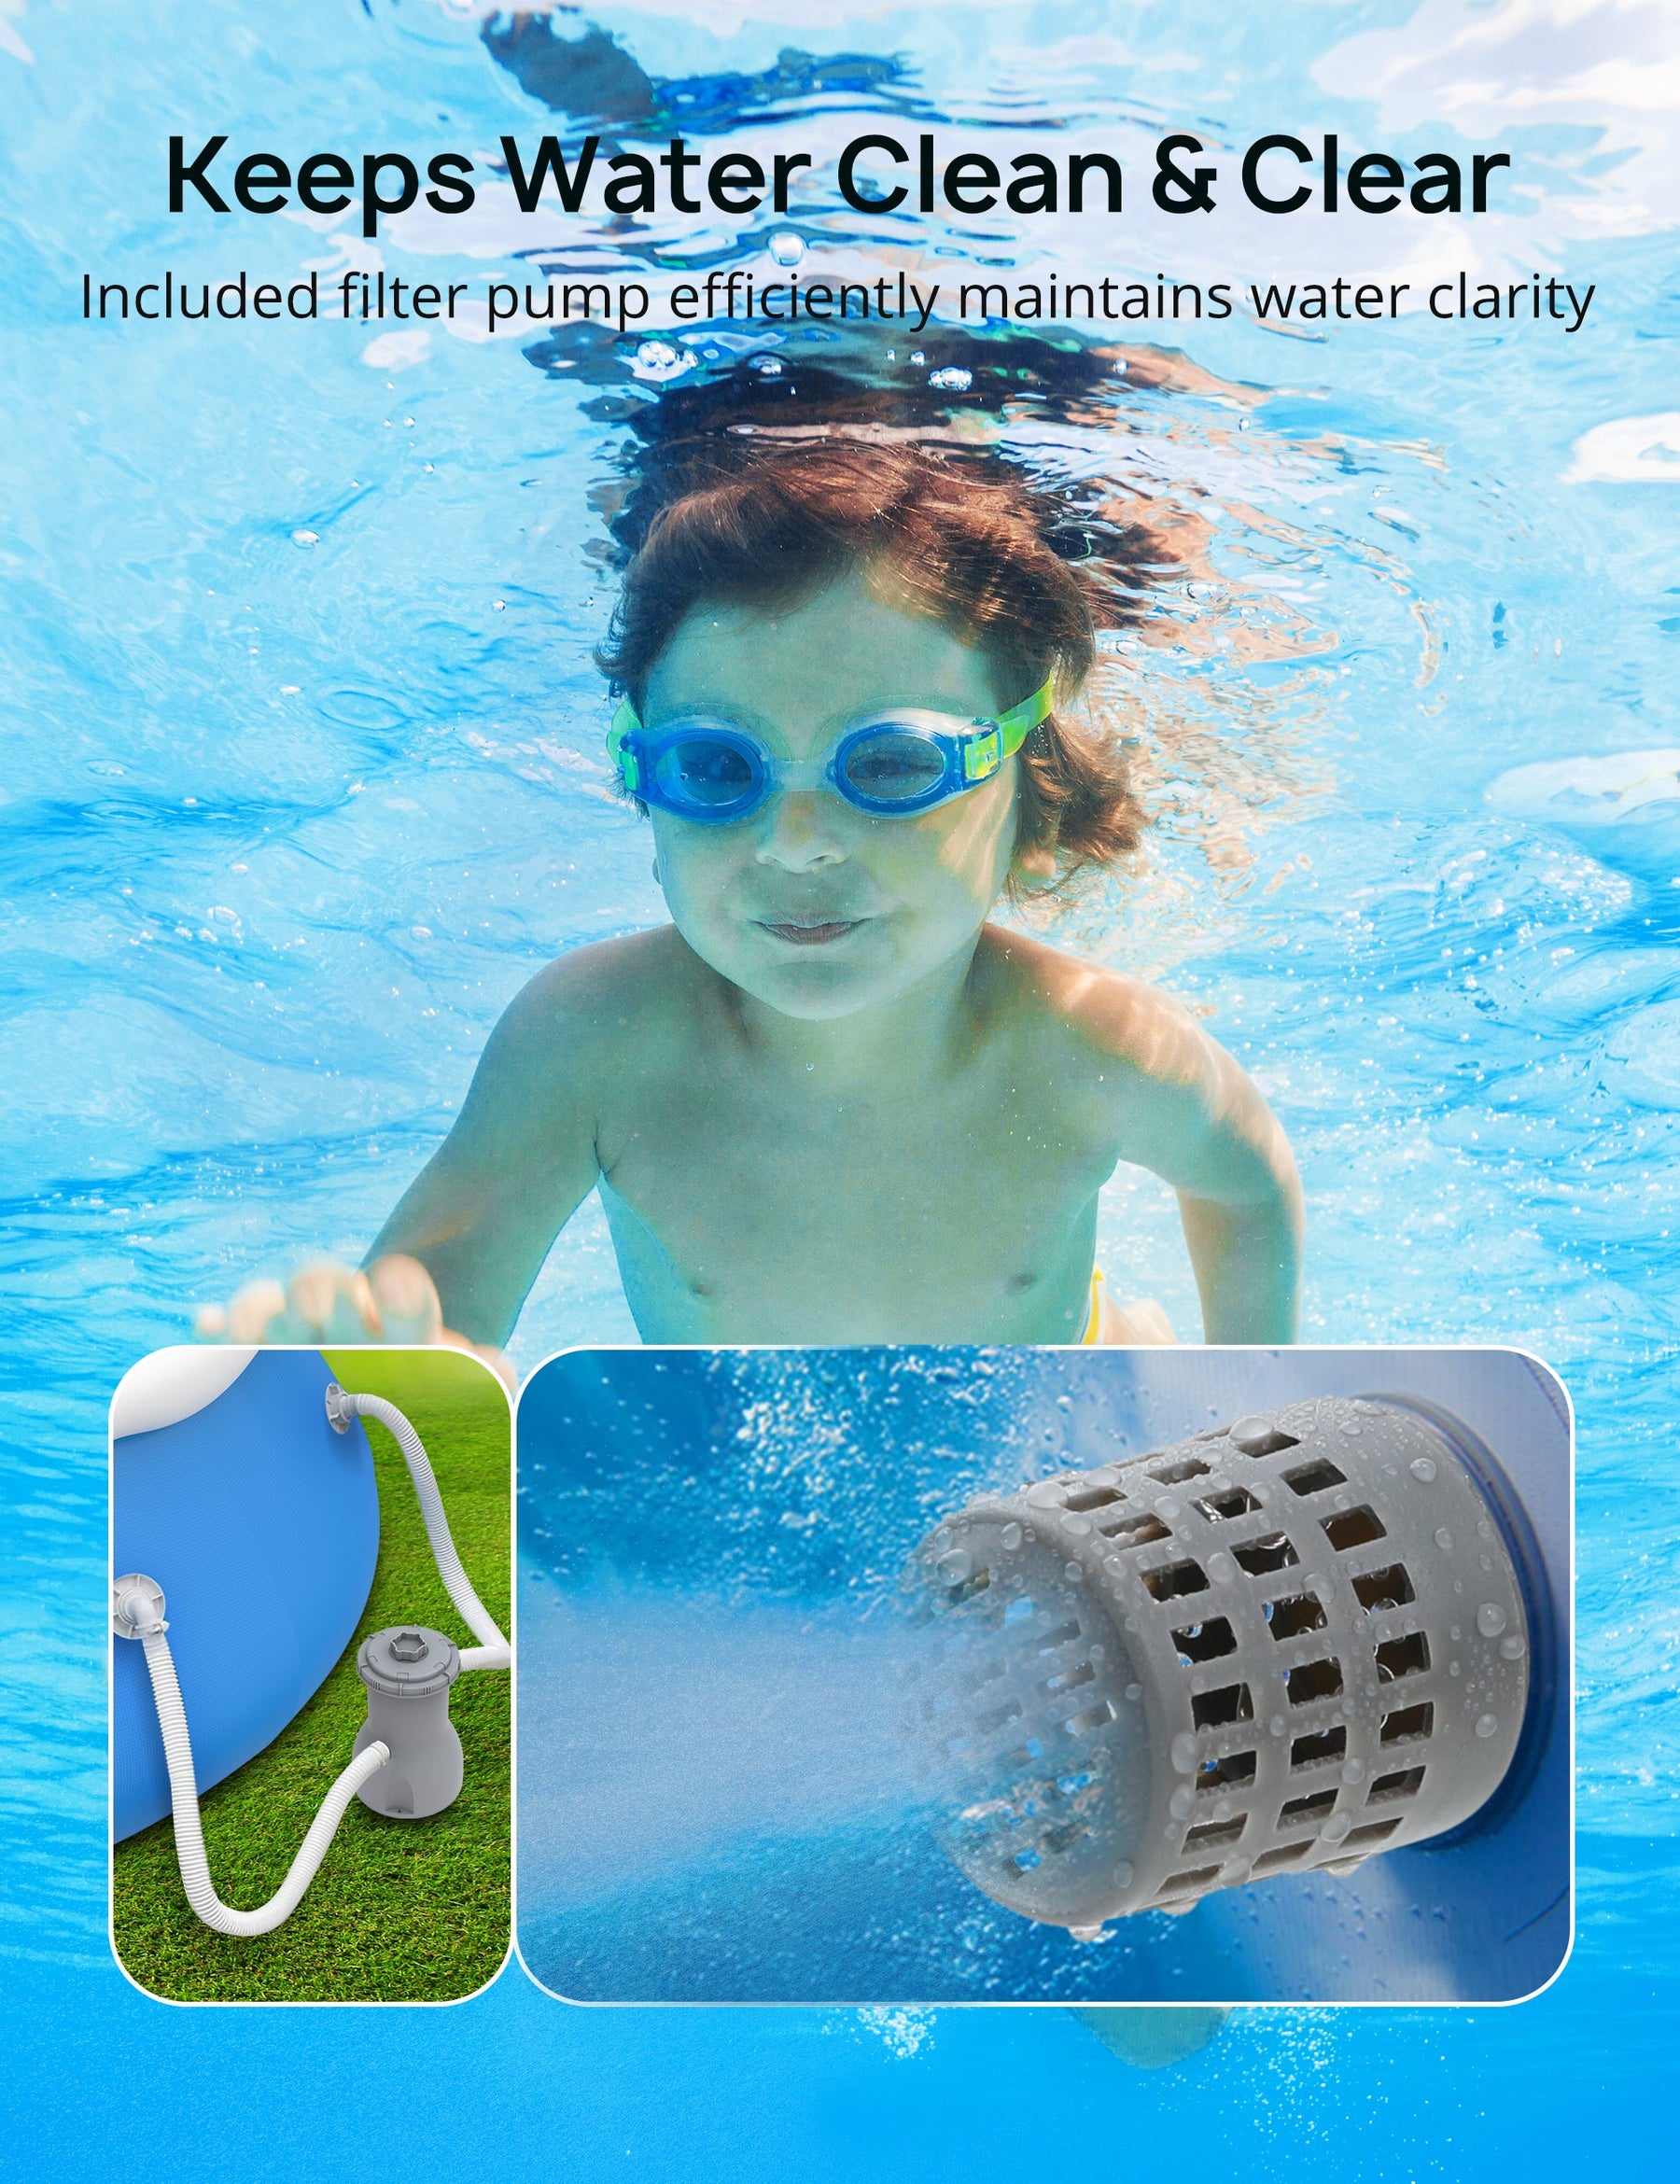 EVAJOY 15ft *35in Inflatable Swimming Pool Include Filter Pump, Ground Cloth and Cover WM